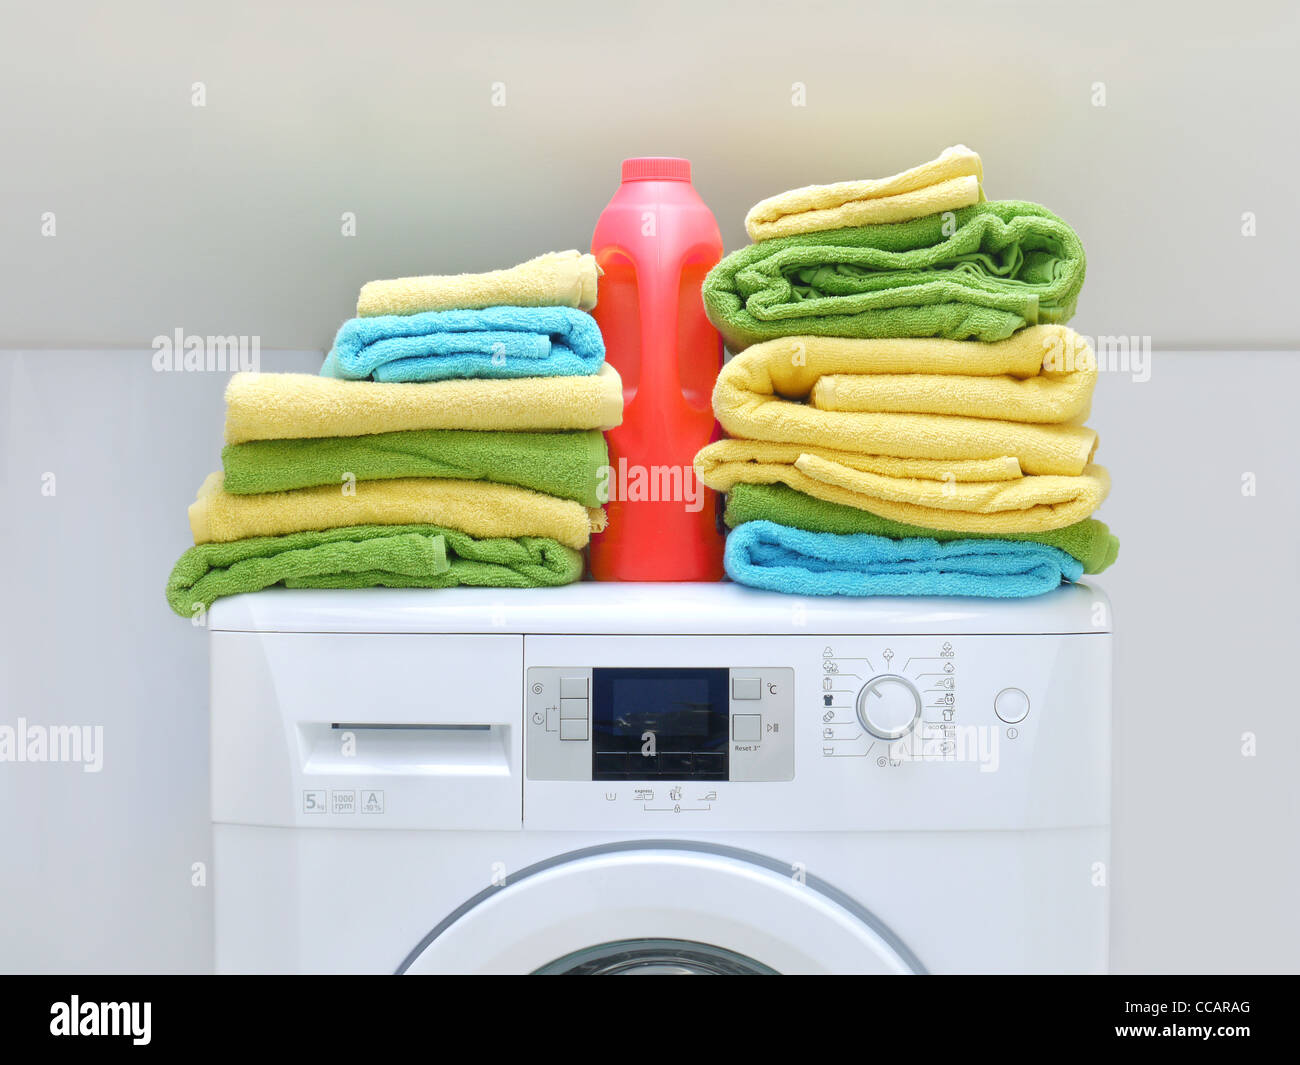 Pile of fresh colorful towels and bottle of detergent on washing machine Stock Photo